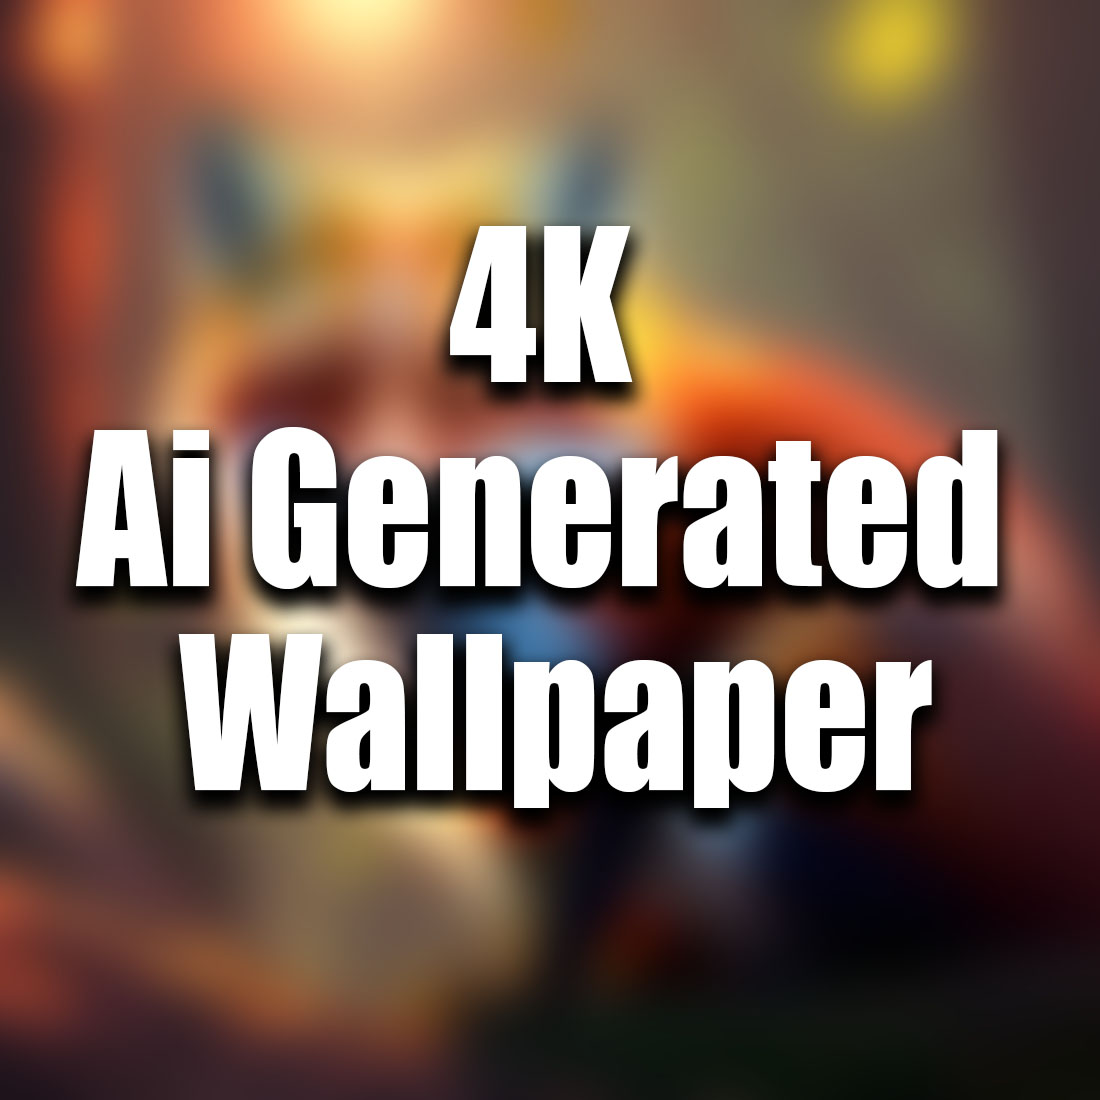 ai generated 4k images/wallpaper cover image.